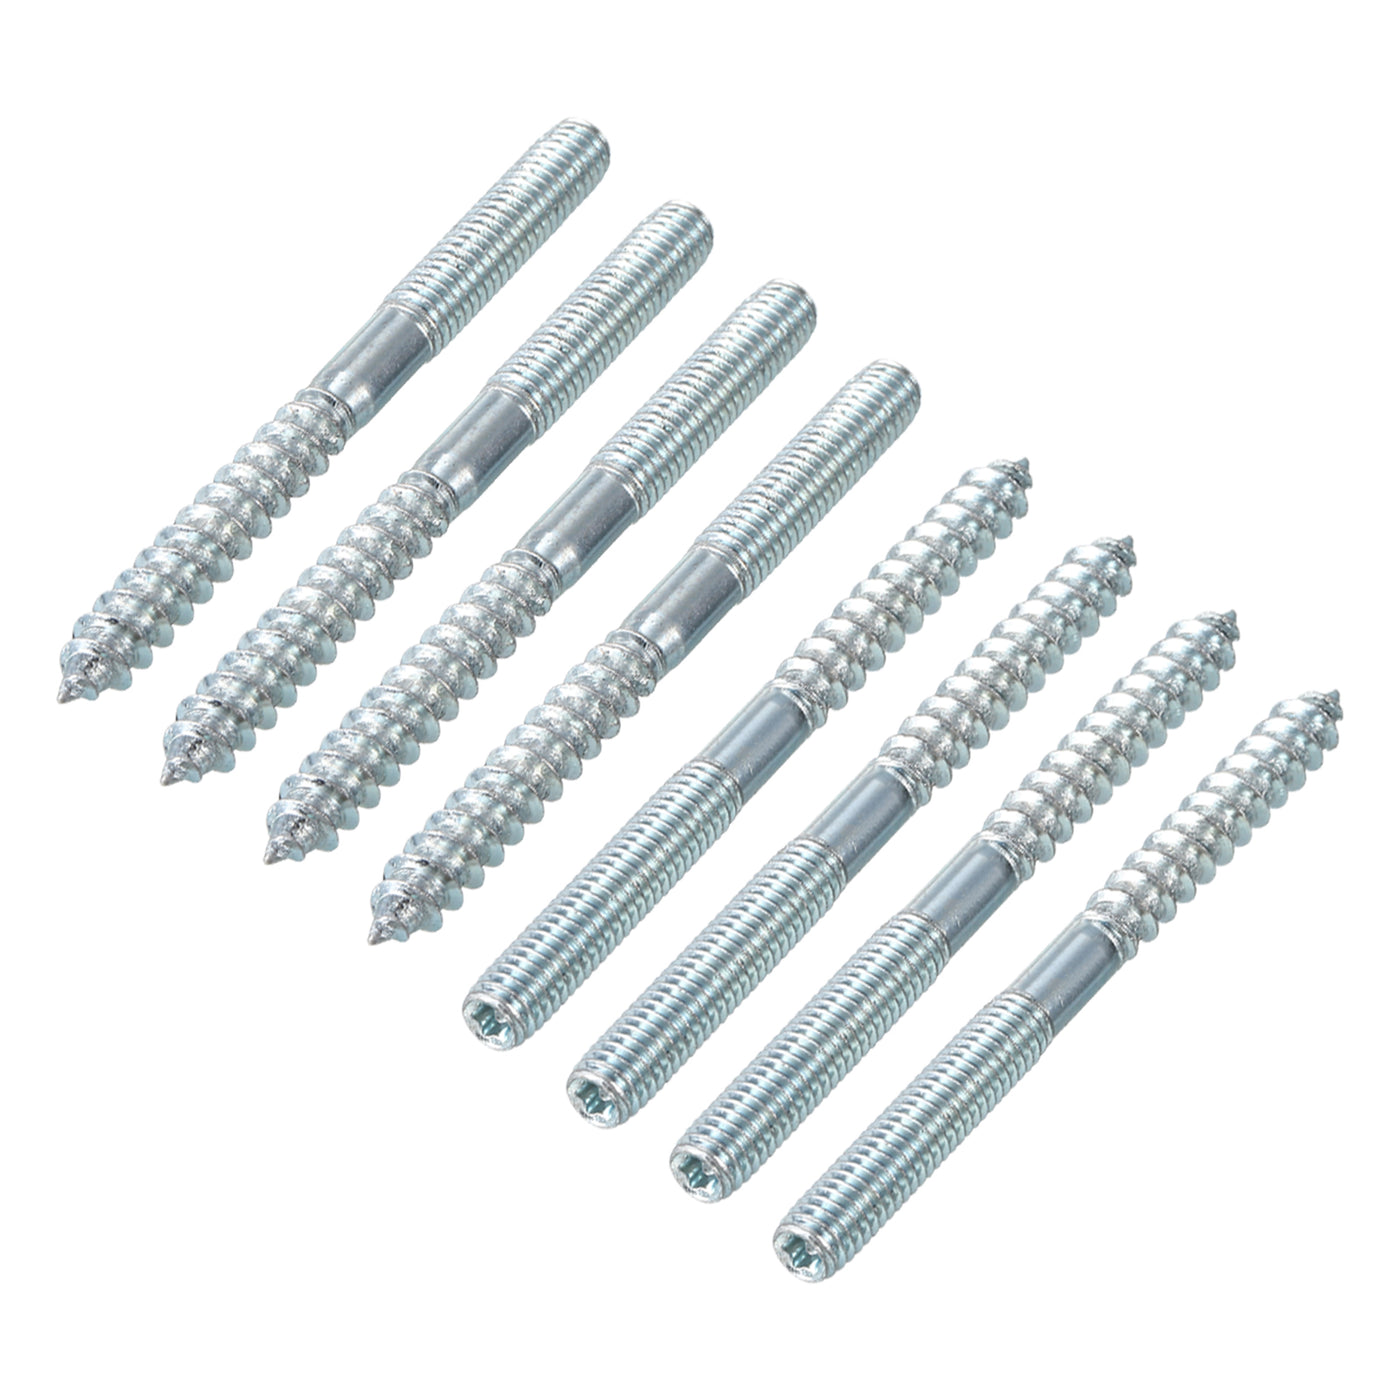 uxcell Uxcell 24Pcs M6x70mm Hanger Bolt Double Headed Bolt Self-Tapping Screw for Furniture